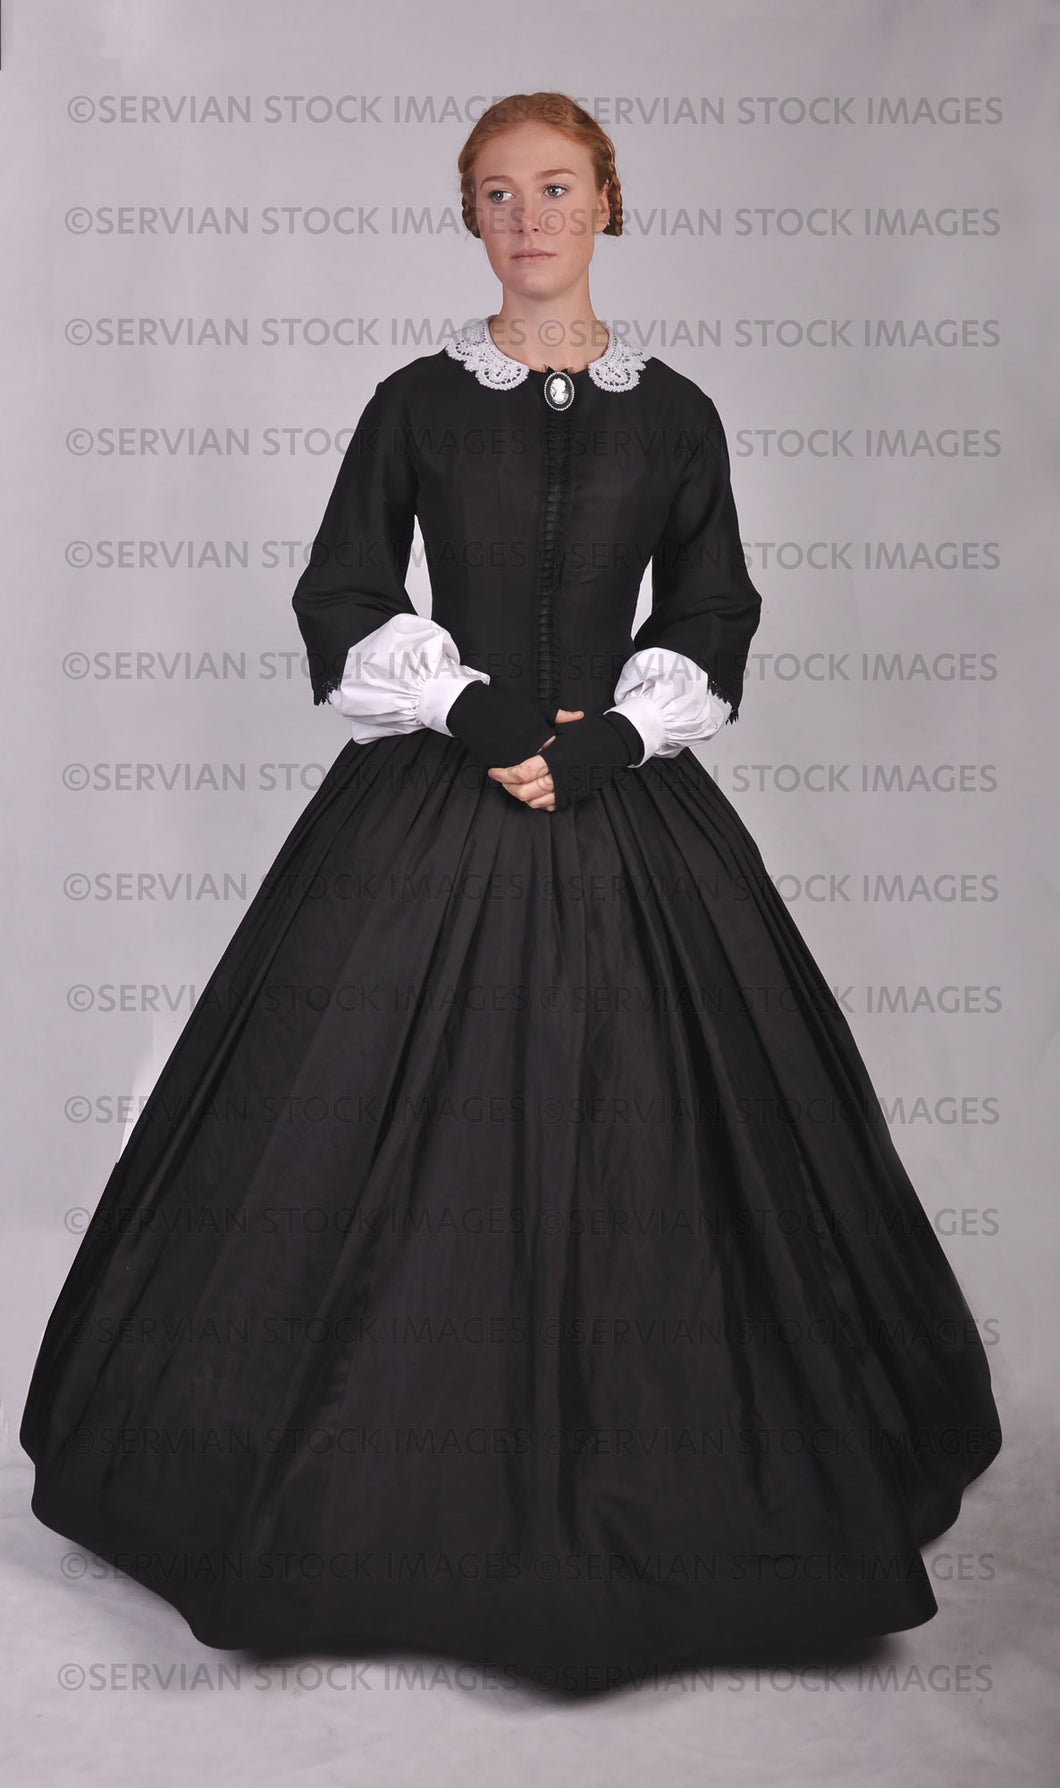 Victorian woman in a black ensemble with a lace collar  (Lauren 0731)